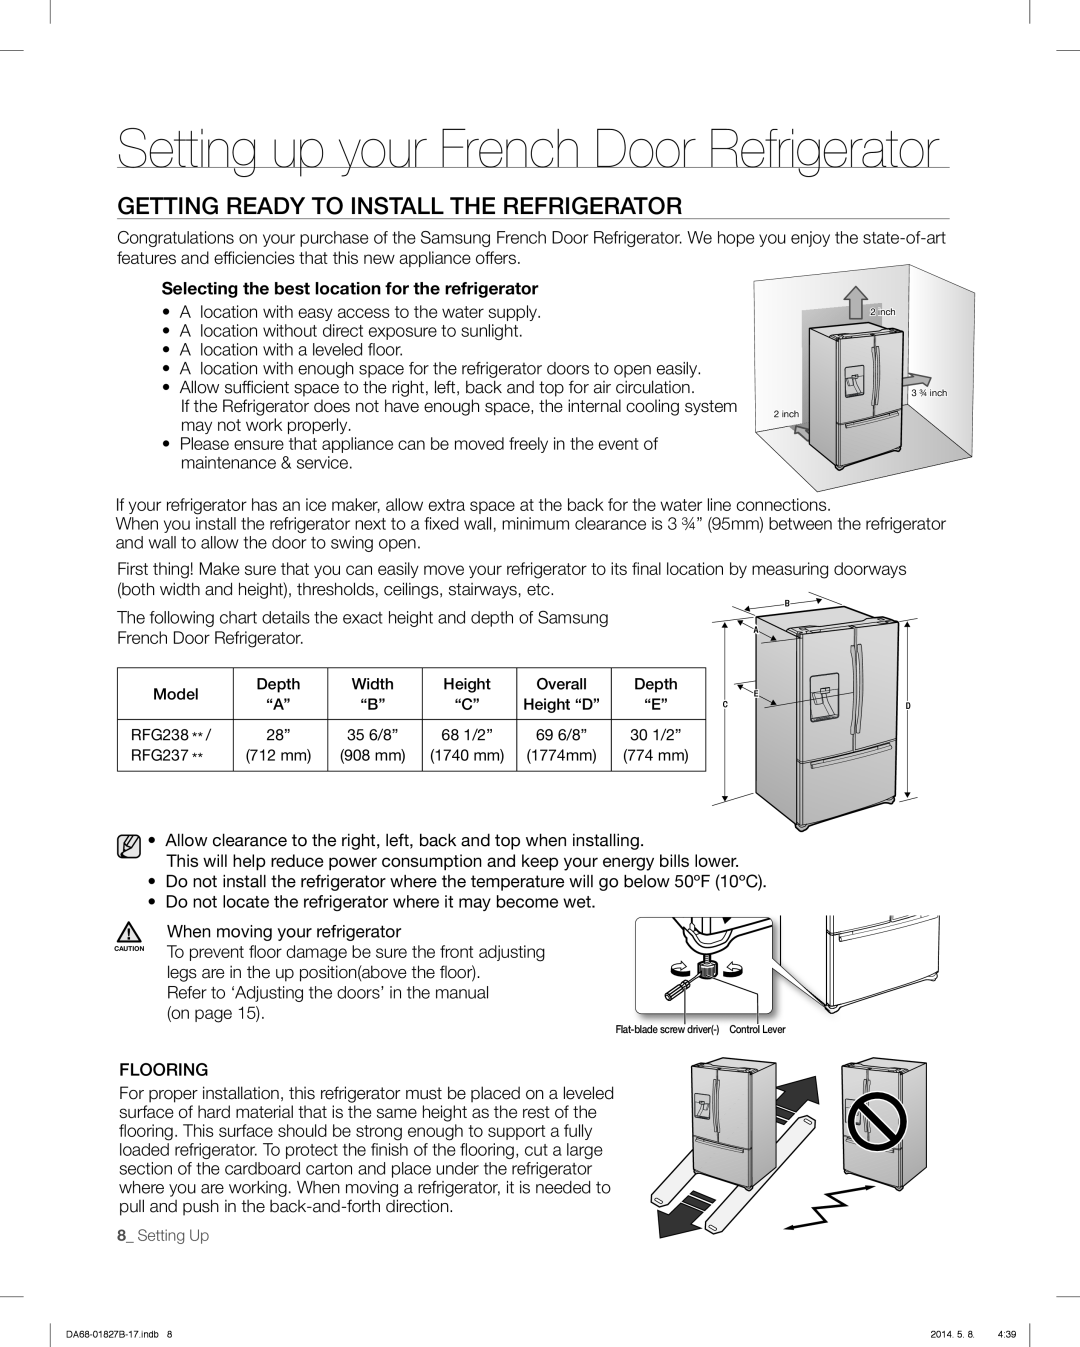 Samsung RFG237AABP, RFG237AARS Setting up your French Door Refrigerator, Getting Ready To Install The Refrigerator 